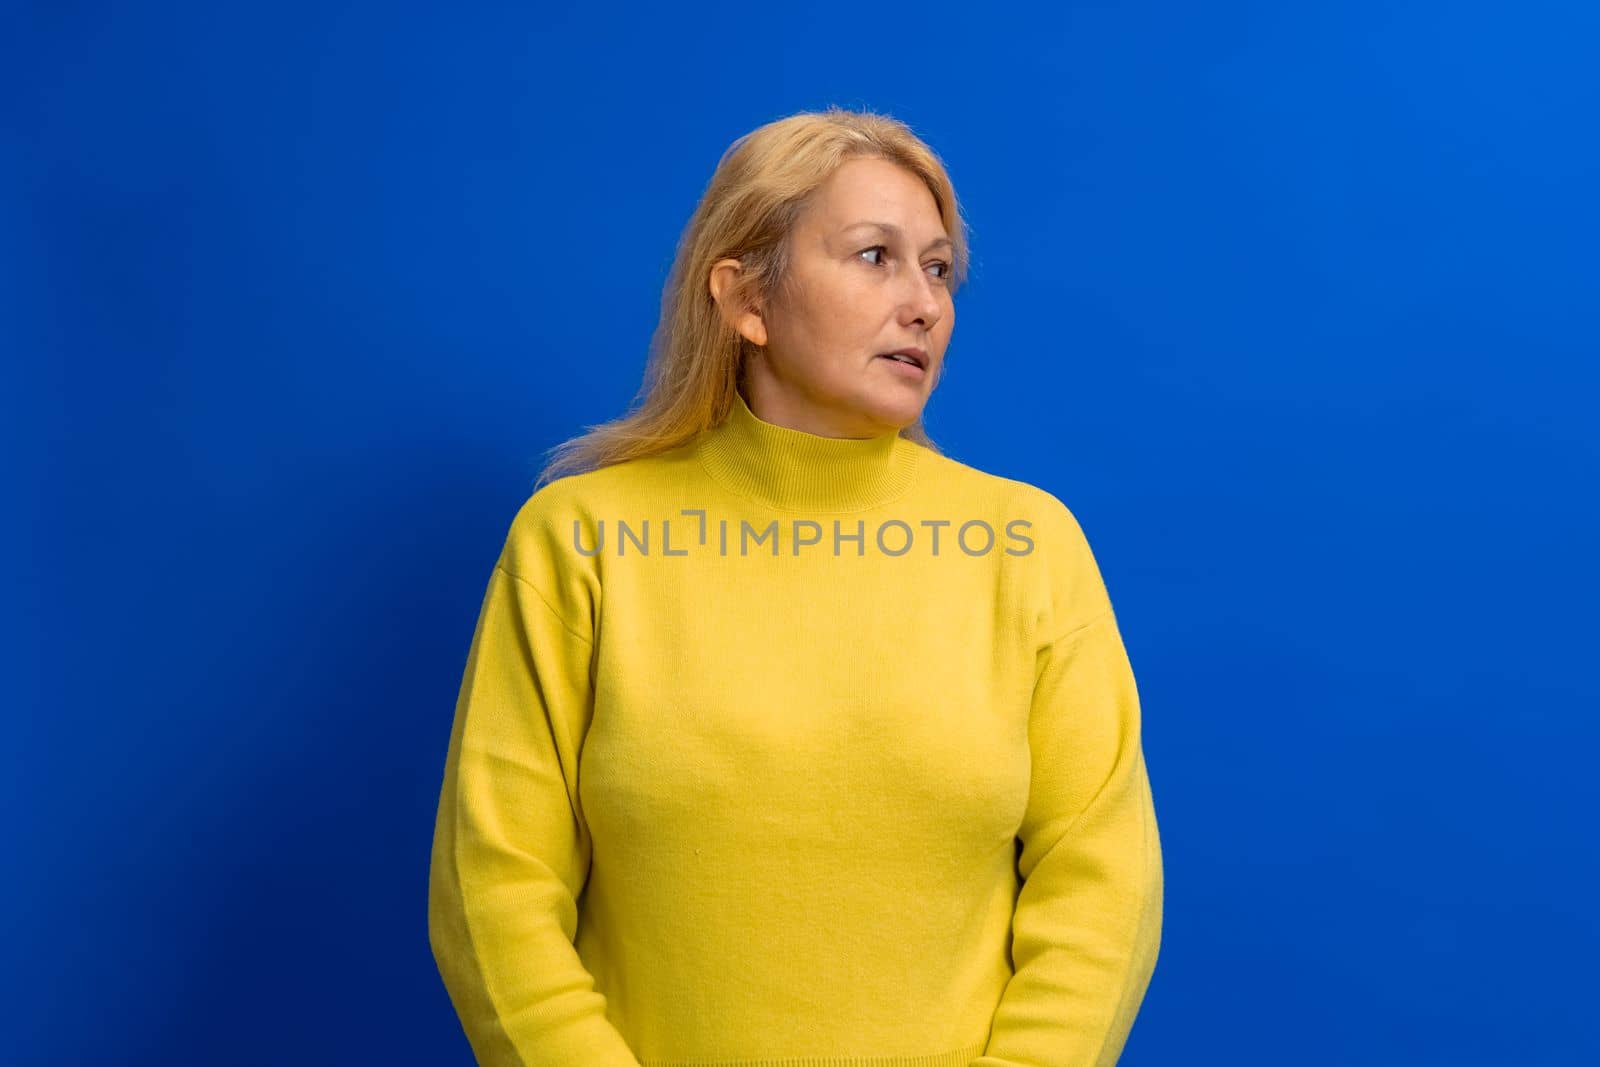 Beautiful woman in her 40s wearing yellow sweater standing on blue background looking to side with serious face